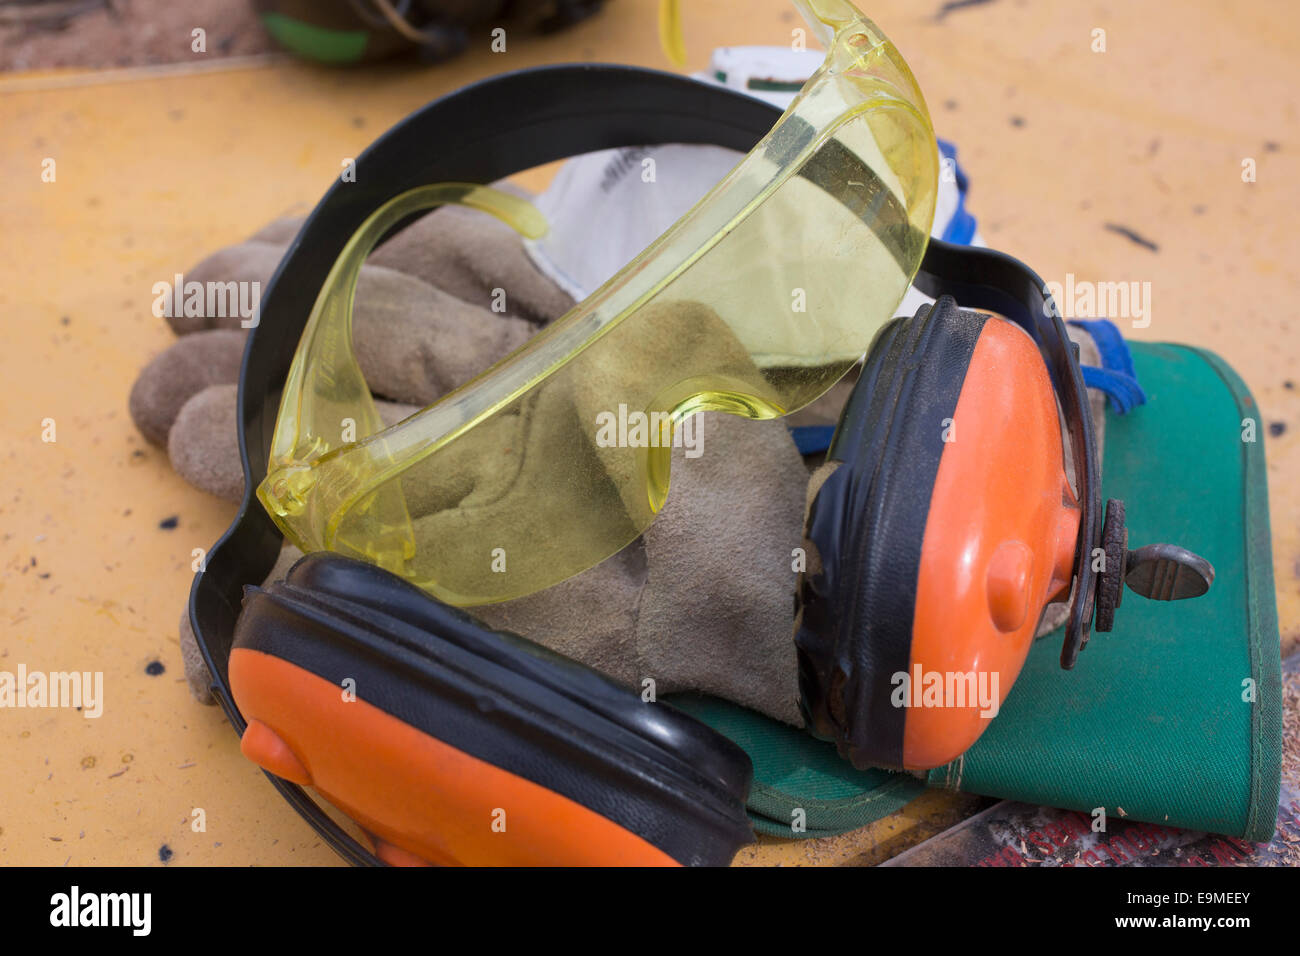 Close-up of construction worker's safety equipment Stock Photo